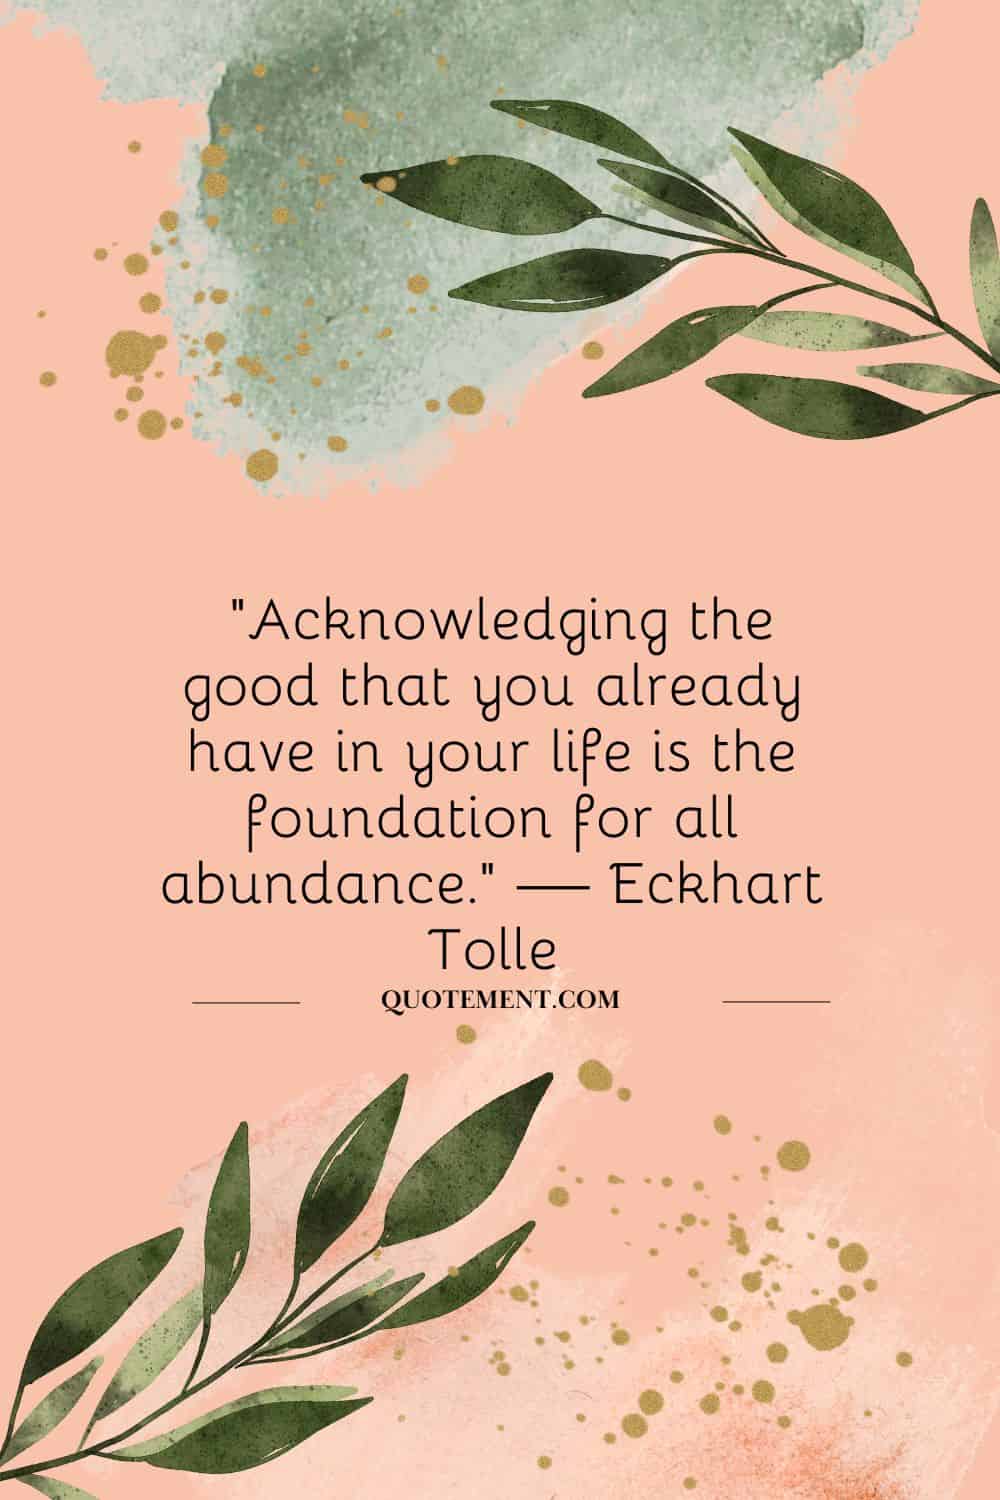 “Acknowledging the good that you already have in your life is the foundation for all abundance.” — Eckhart Tolle